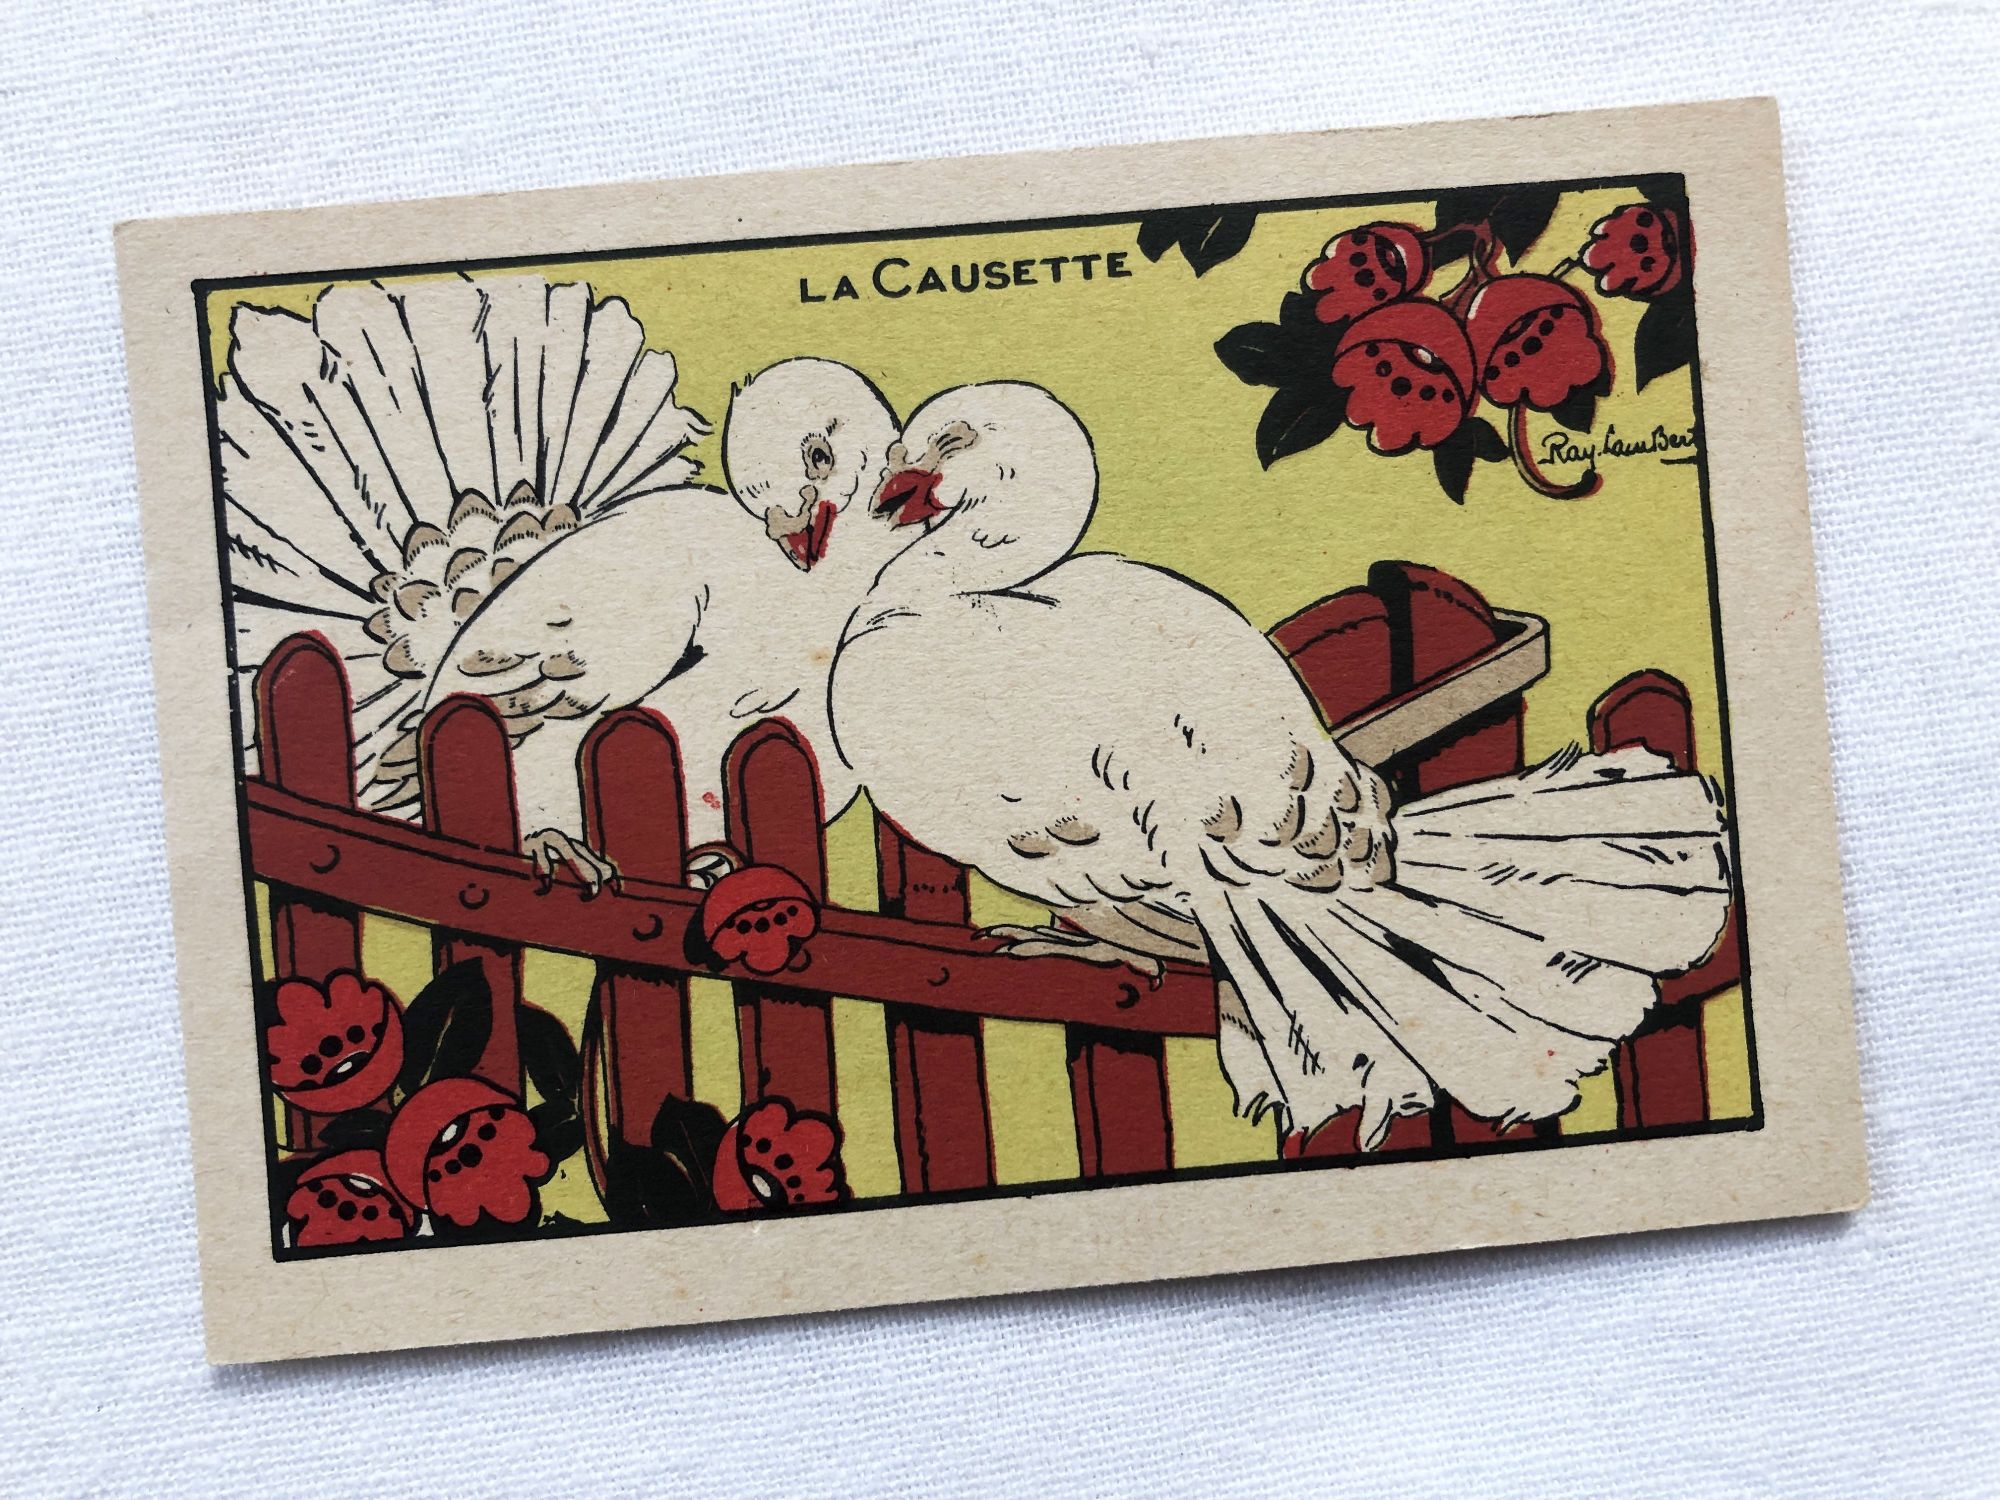 Vintage card for children by the French illustrator Ray-Lambert - "La causette""